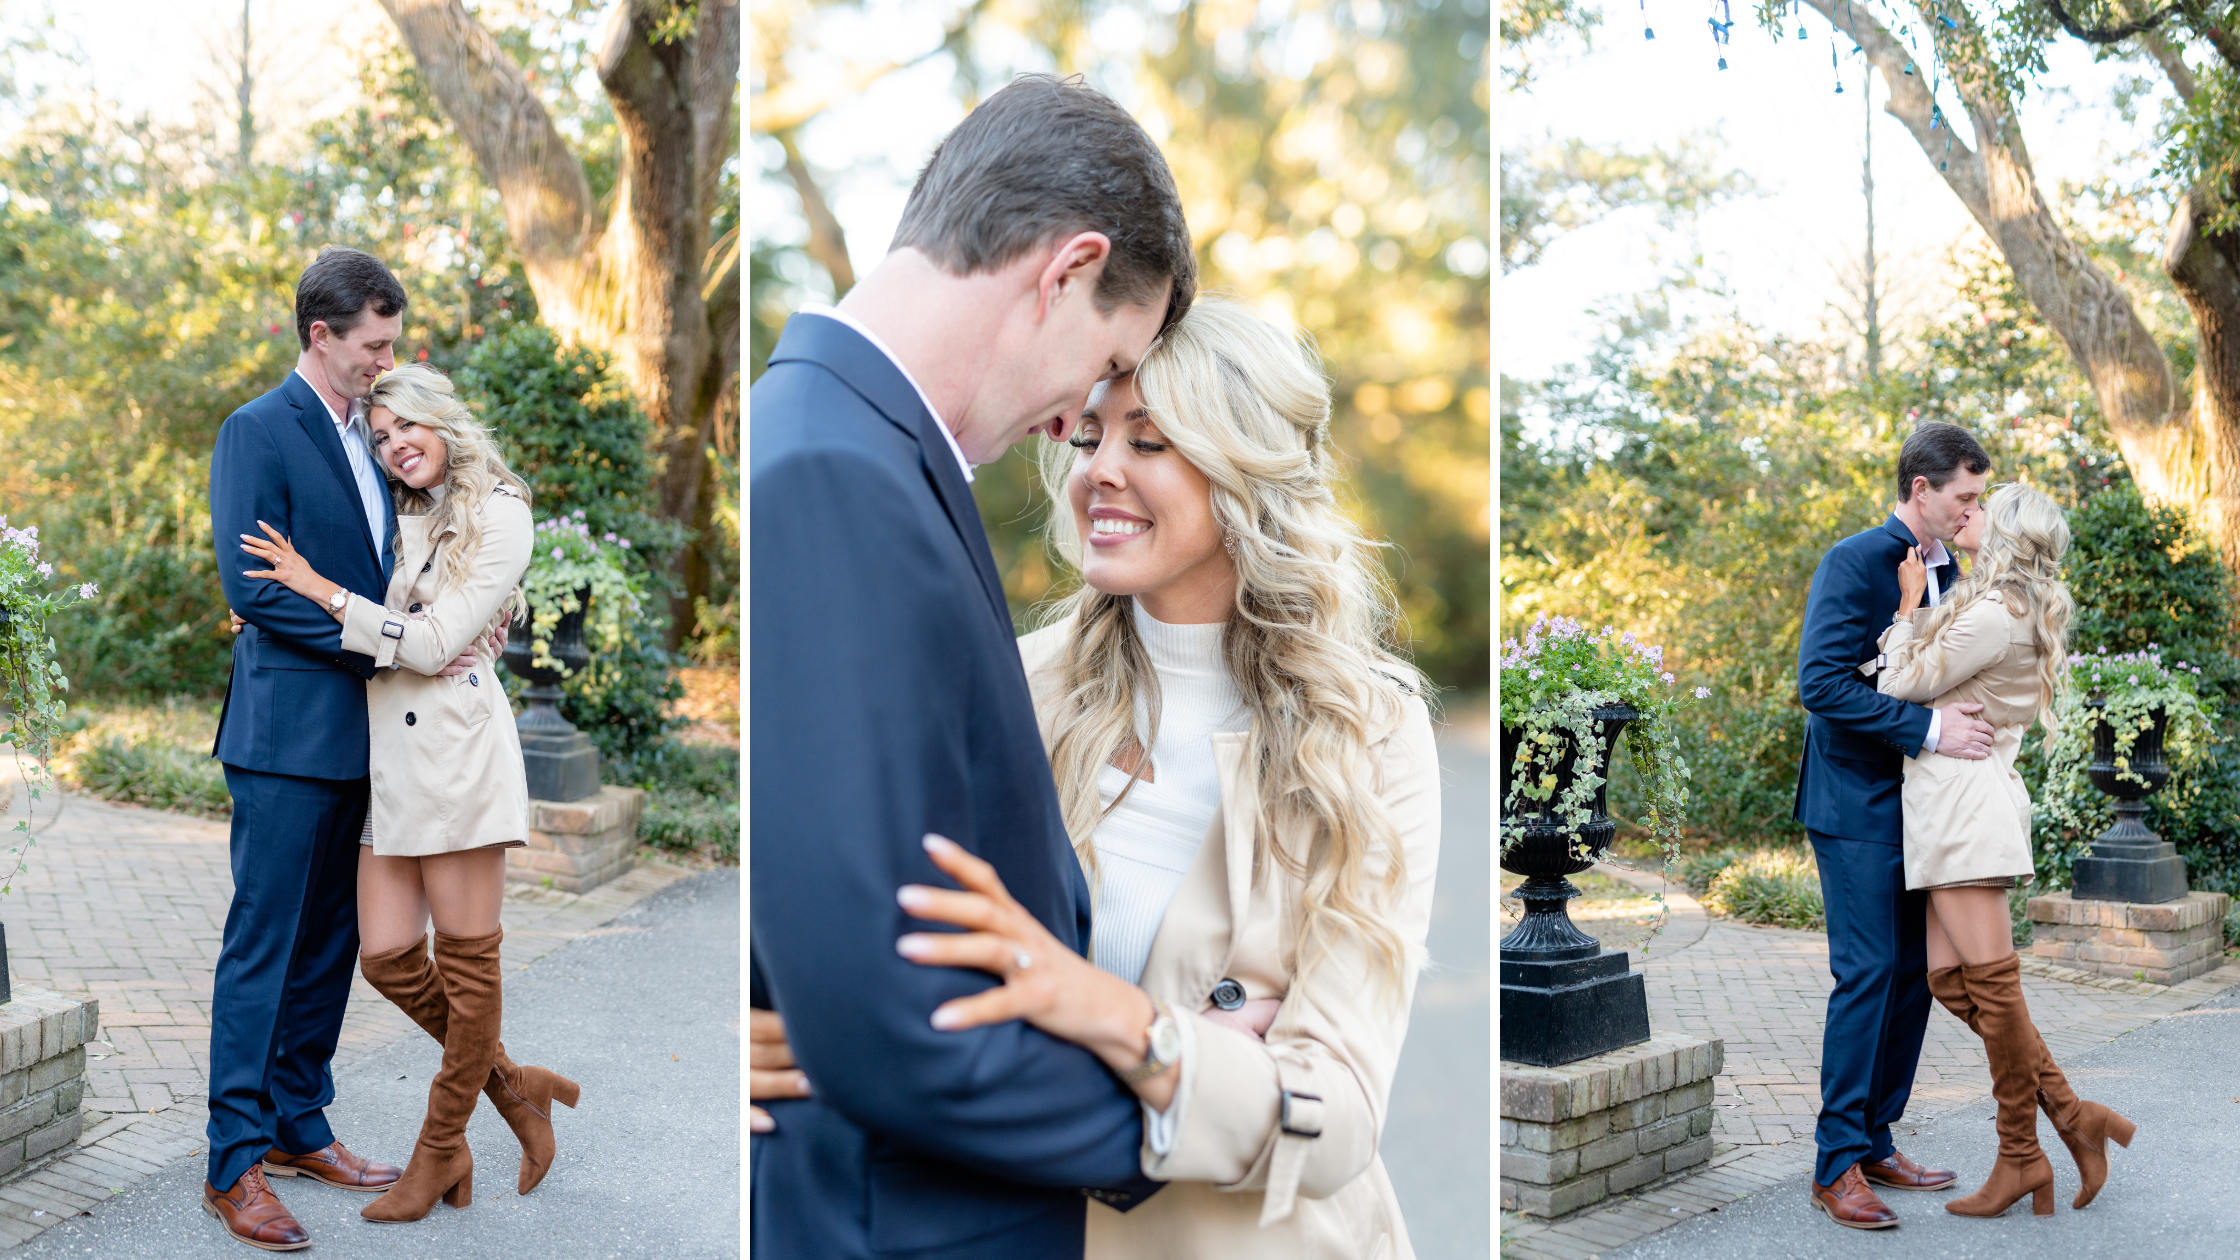 Bellingrath Gardens Engagement Session in January Photographed by Kristen Marcus Photography